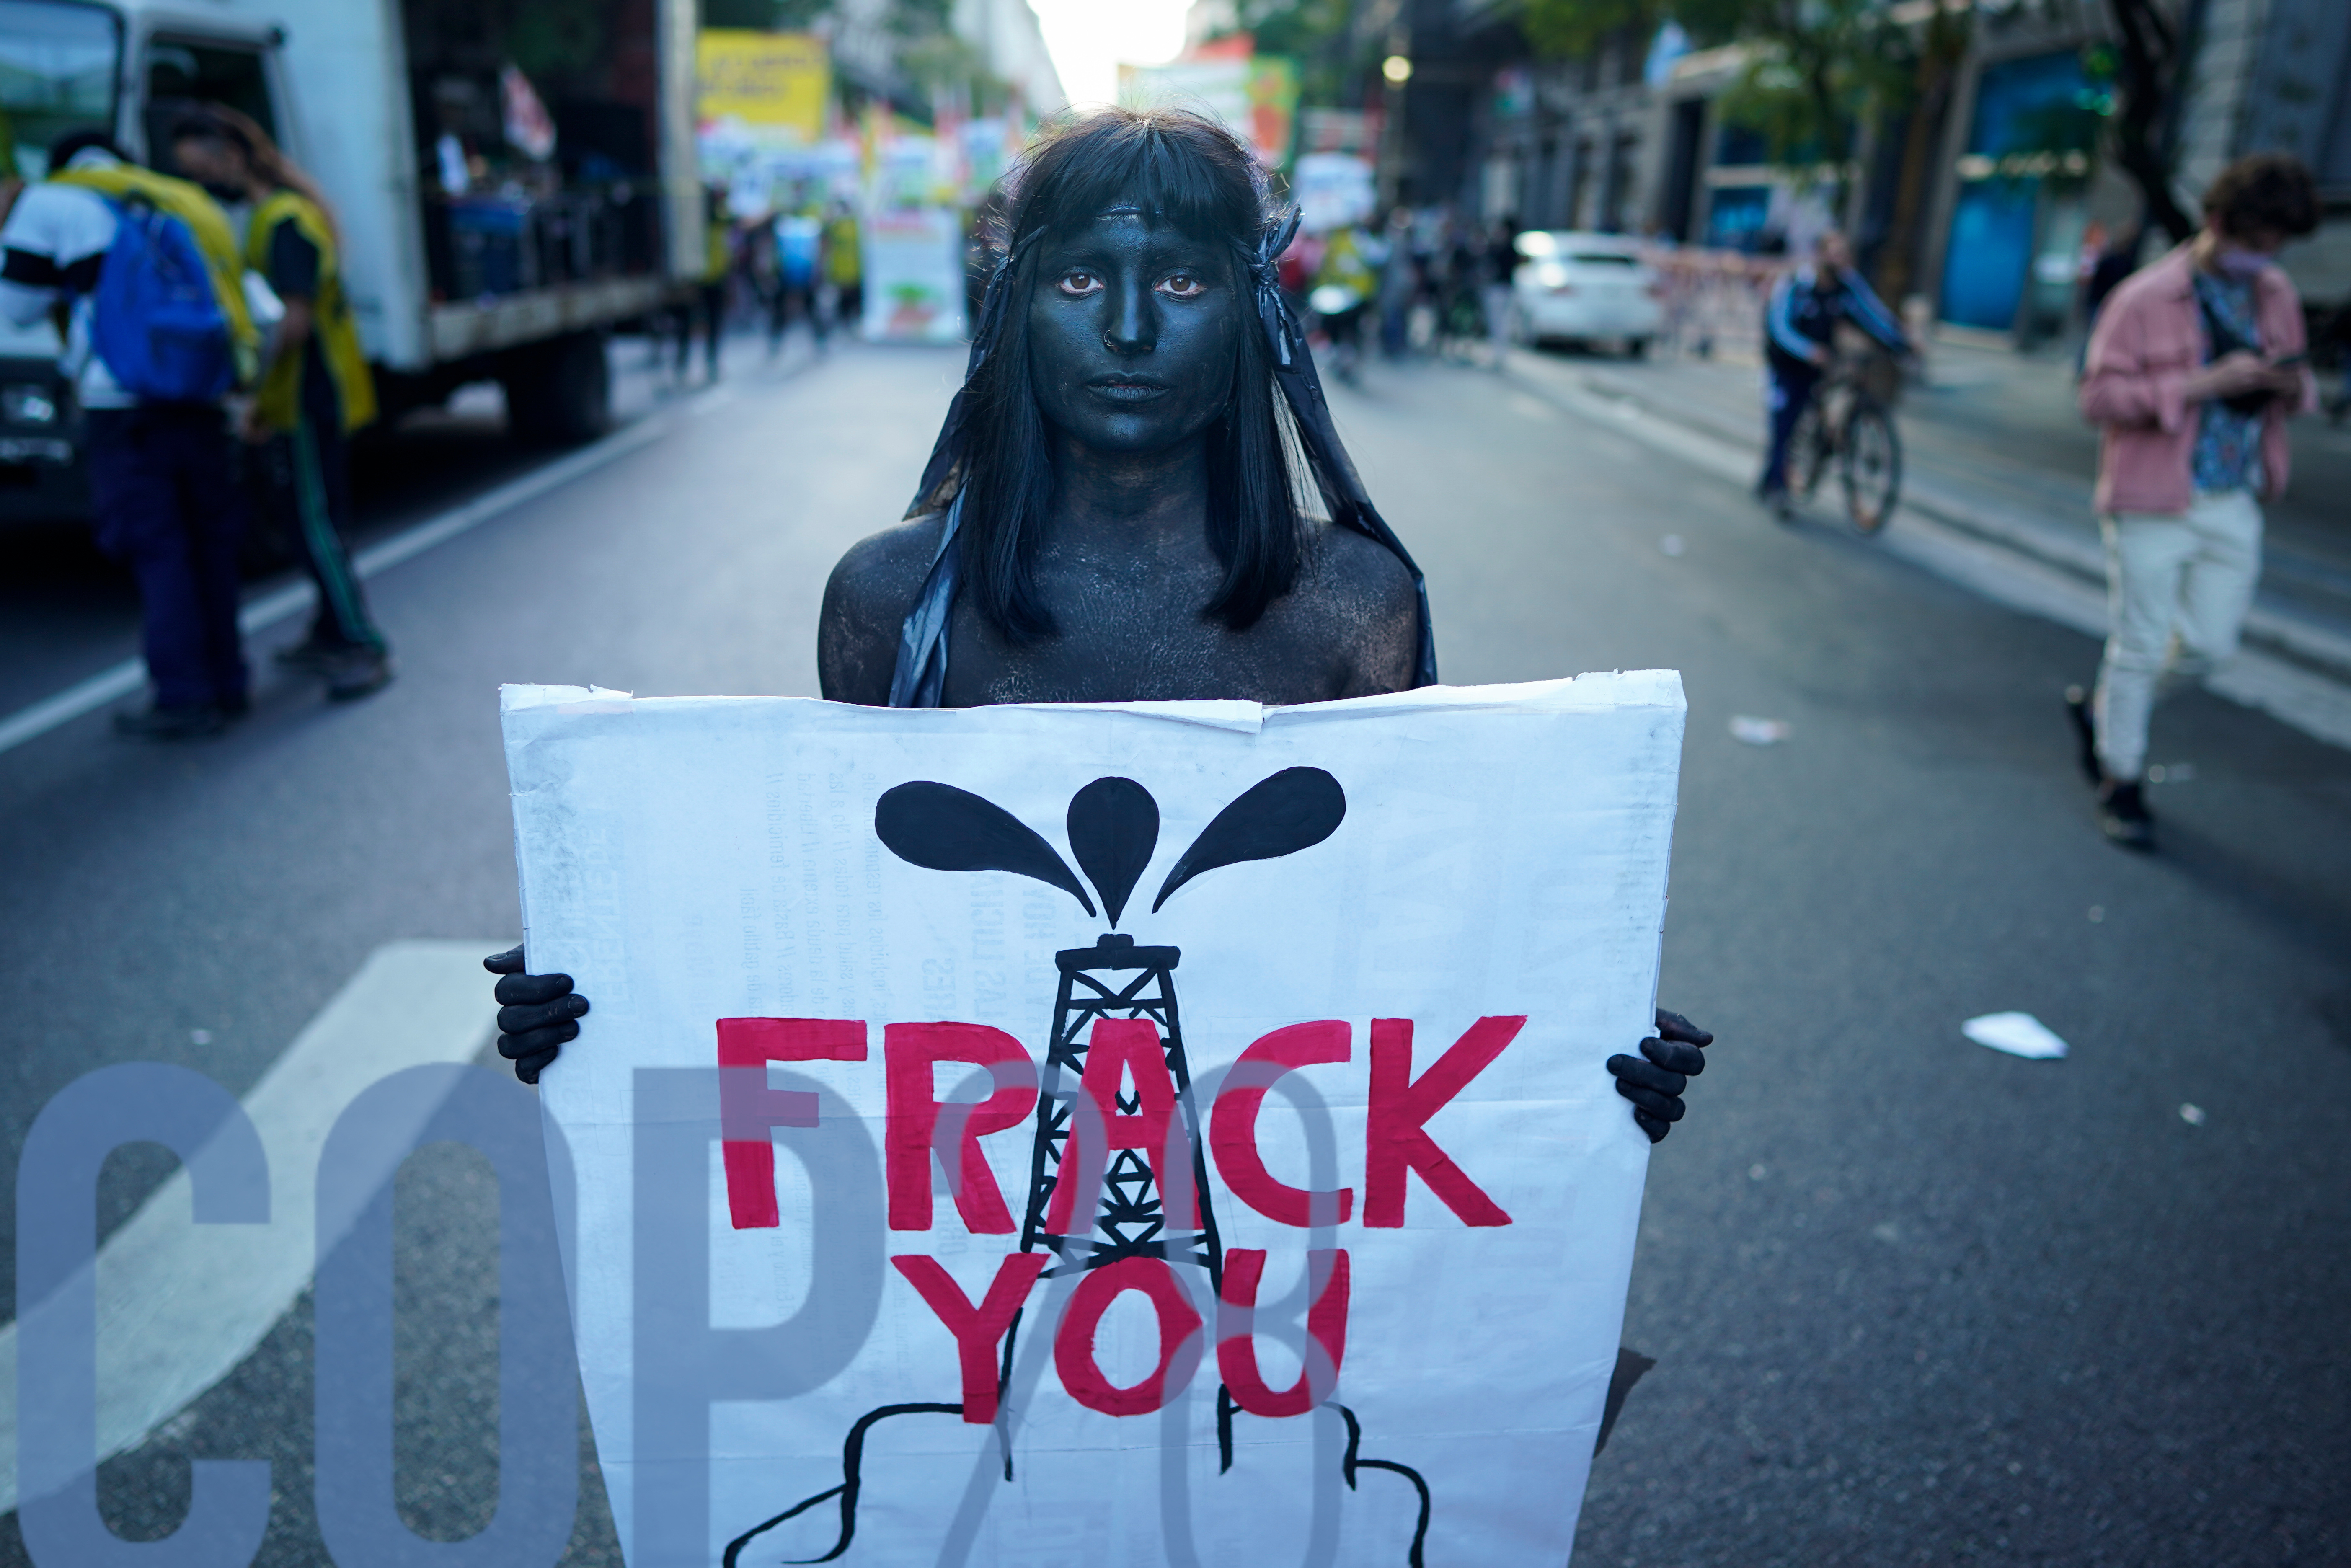 A demonstrator holds a sign against fracking during a demonstration of the global climate strike "Fridays for Future" in Buenos Aires, Argentina, Friday, 24 September 2021.